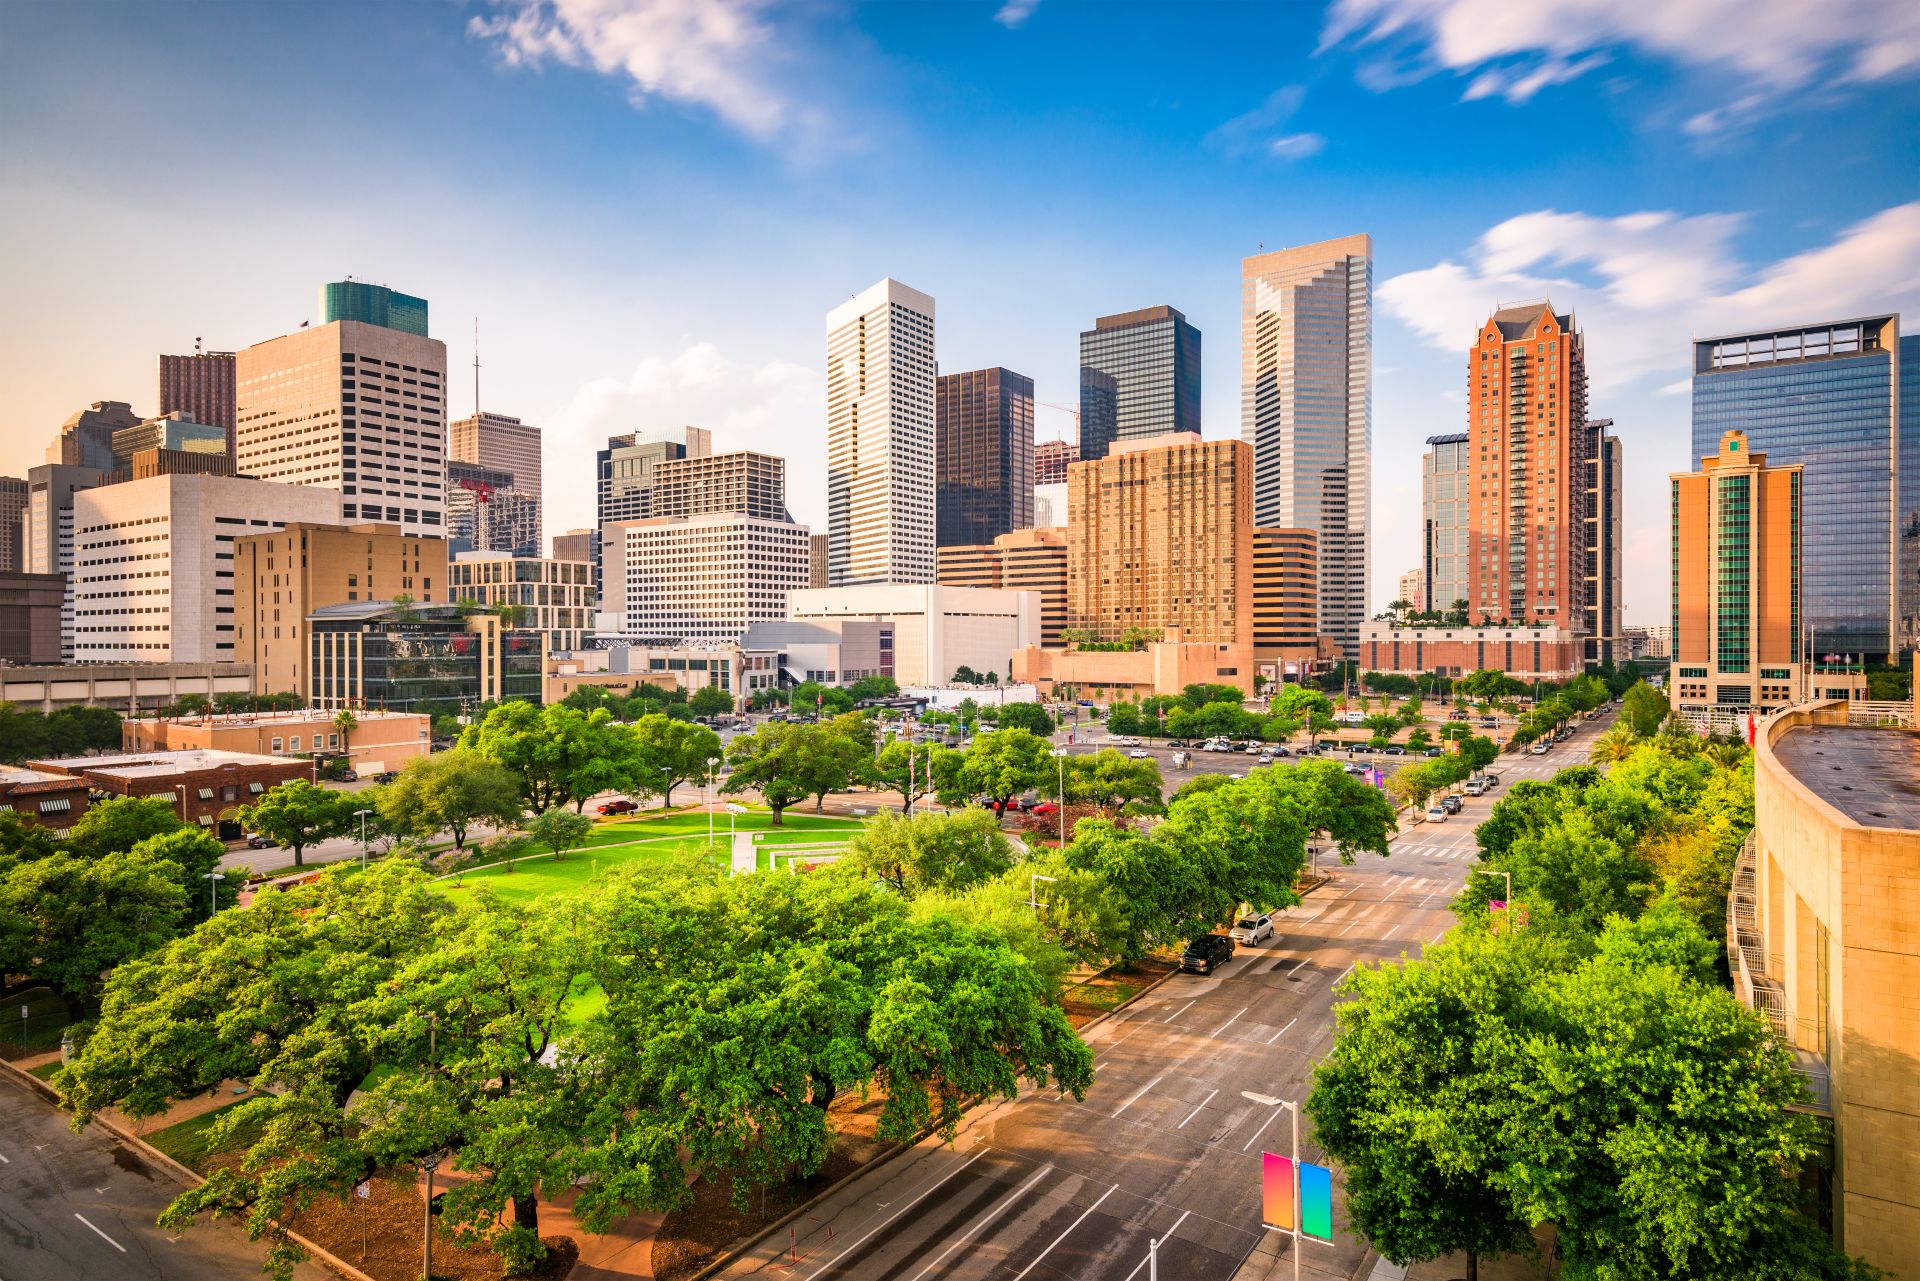 The city of Houston, Texas, is in the center of the city by the Plaza Raíz